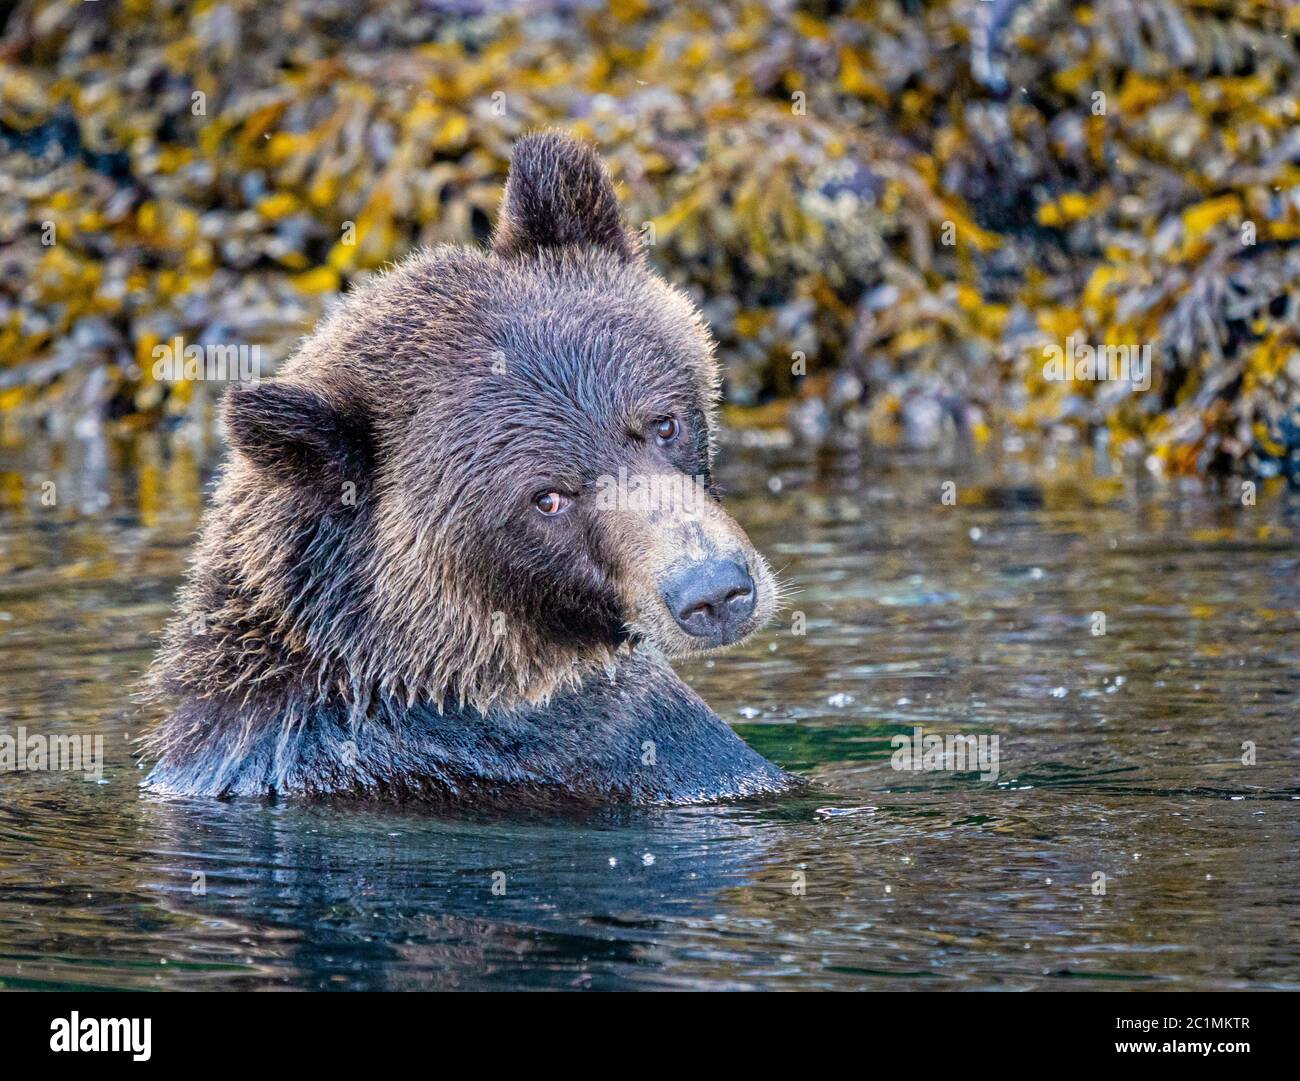 Female grizzly bear having a bath along the shoreline at low tide in Knight Inlet, First Nations Territory, British Columbia, Canada Stock Photo